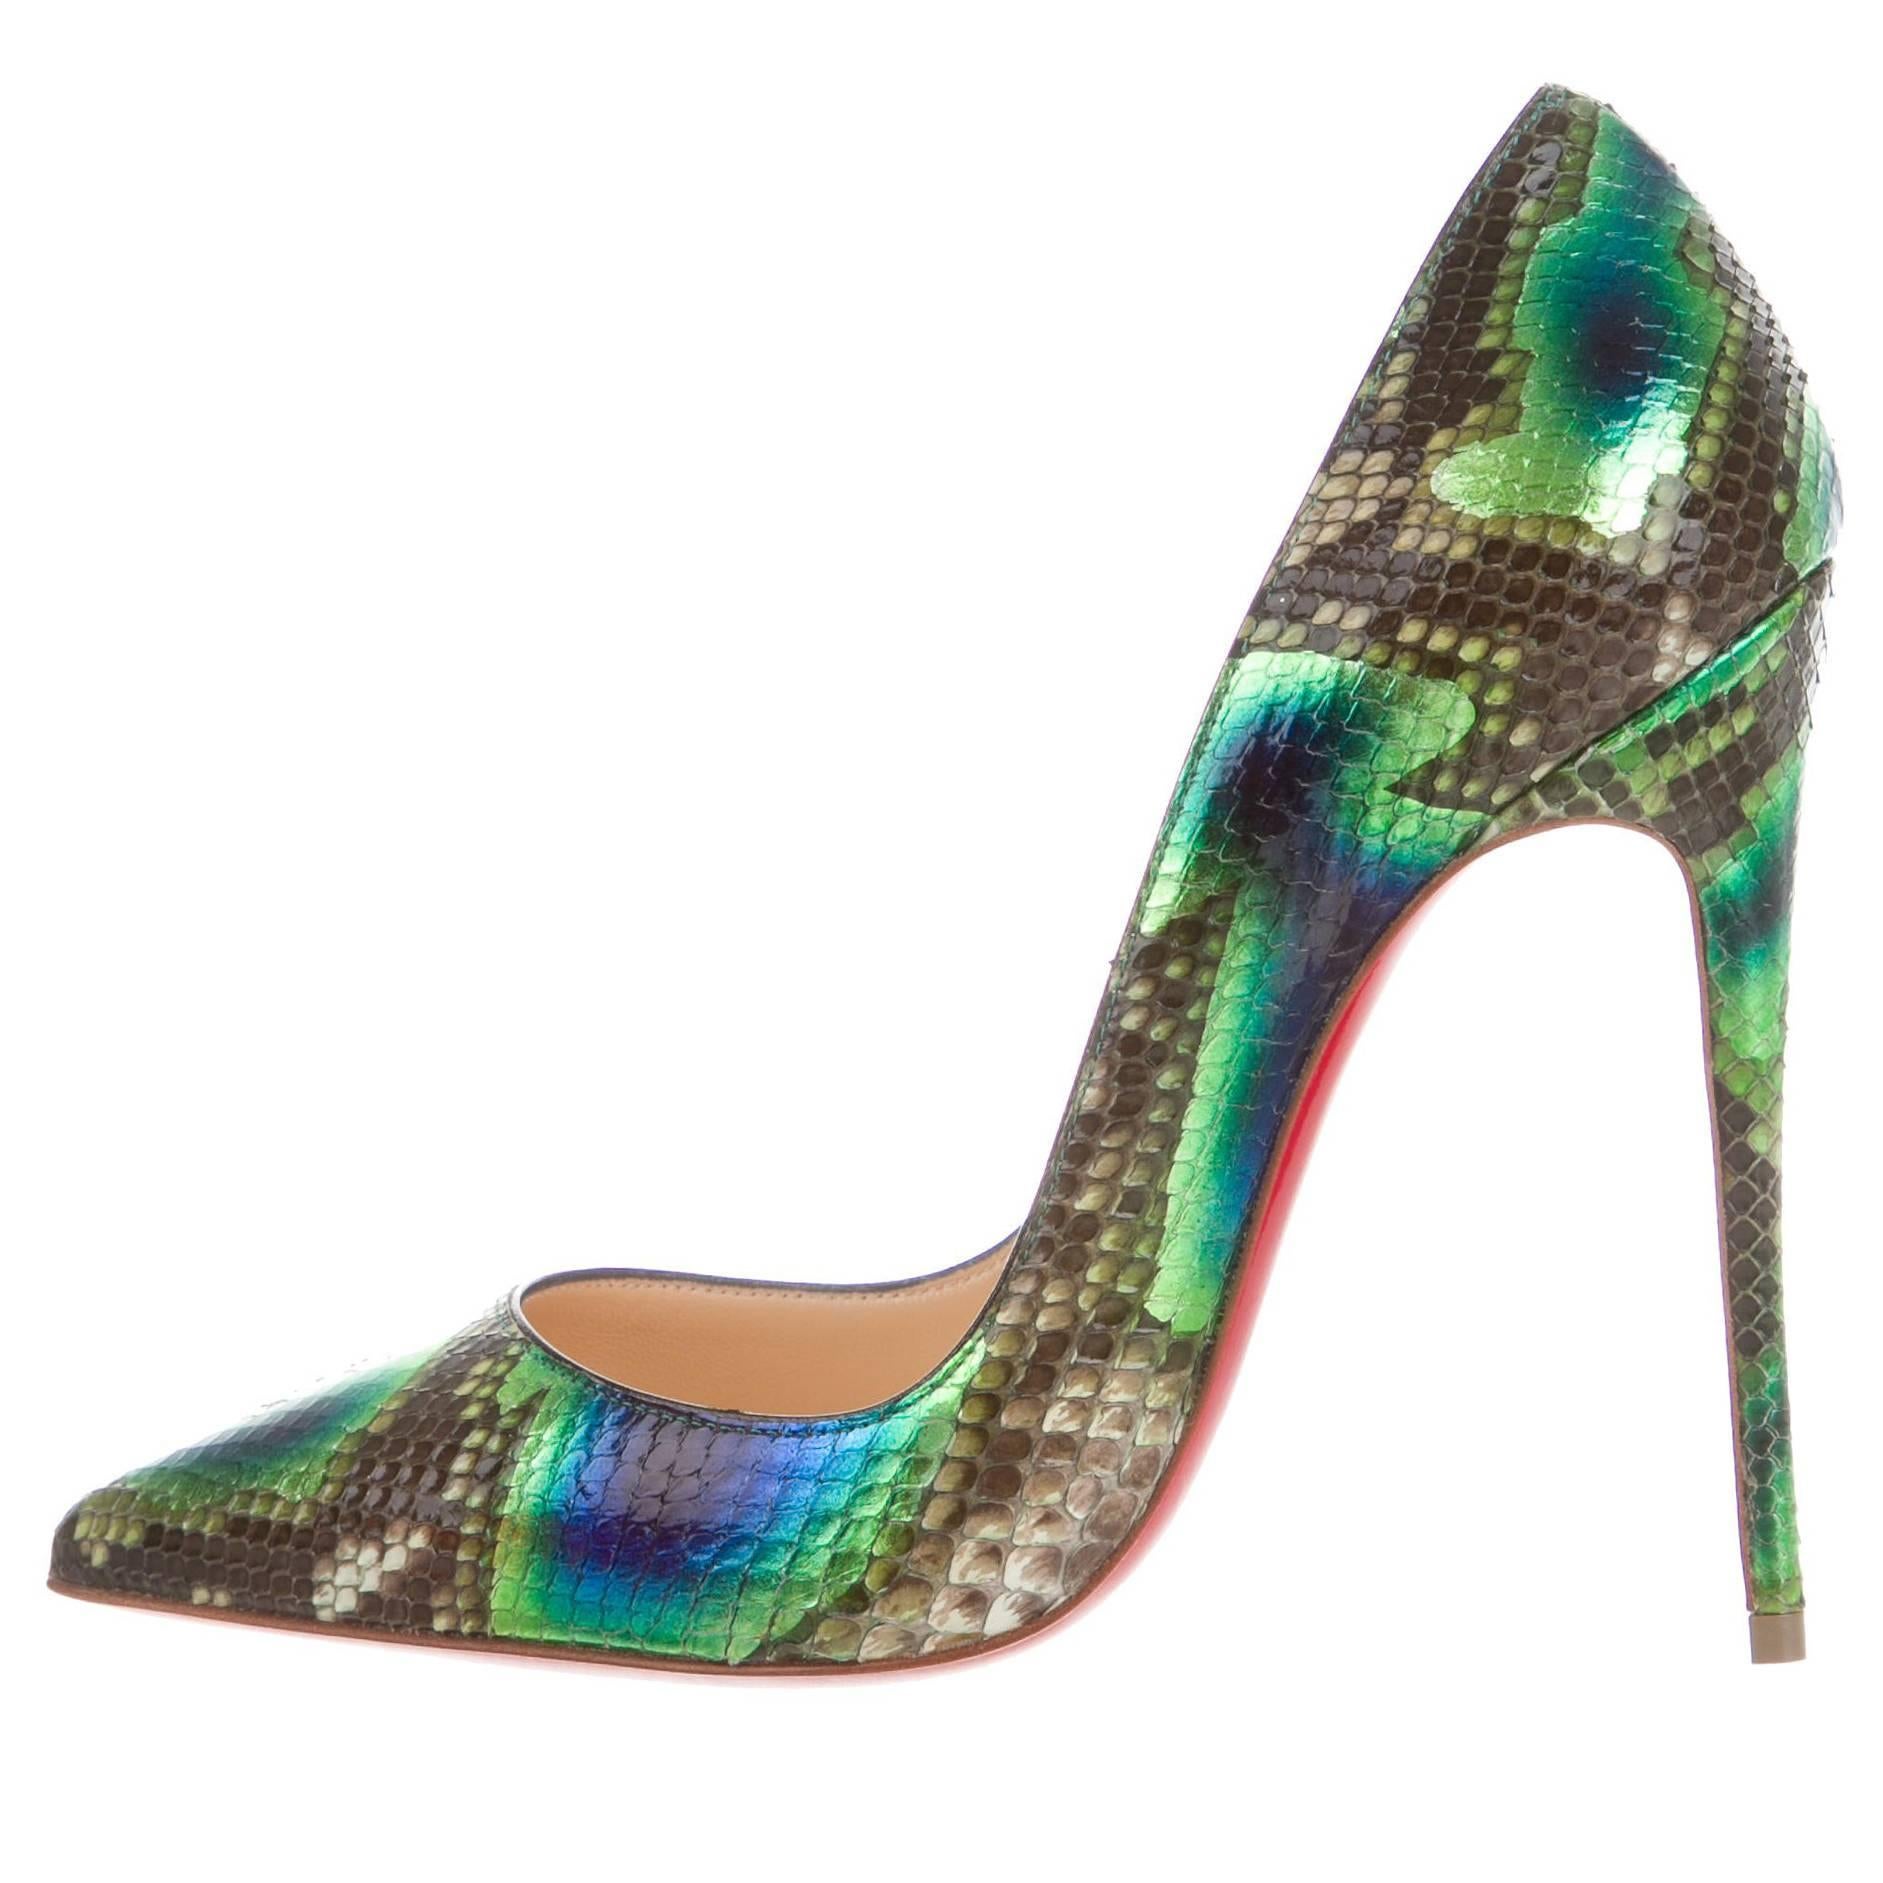 Christian Louboutin NEW SOLD OUT Rainbow Snakeskin Evening Pumps Heels in Box